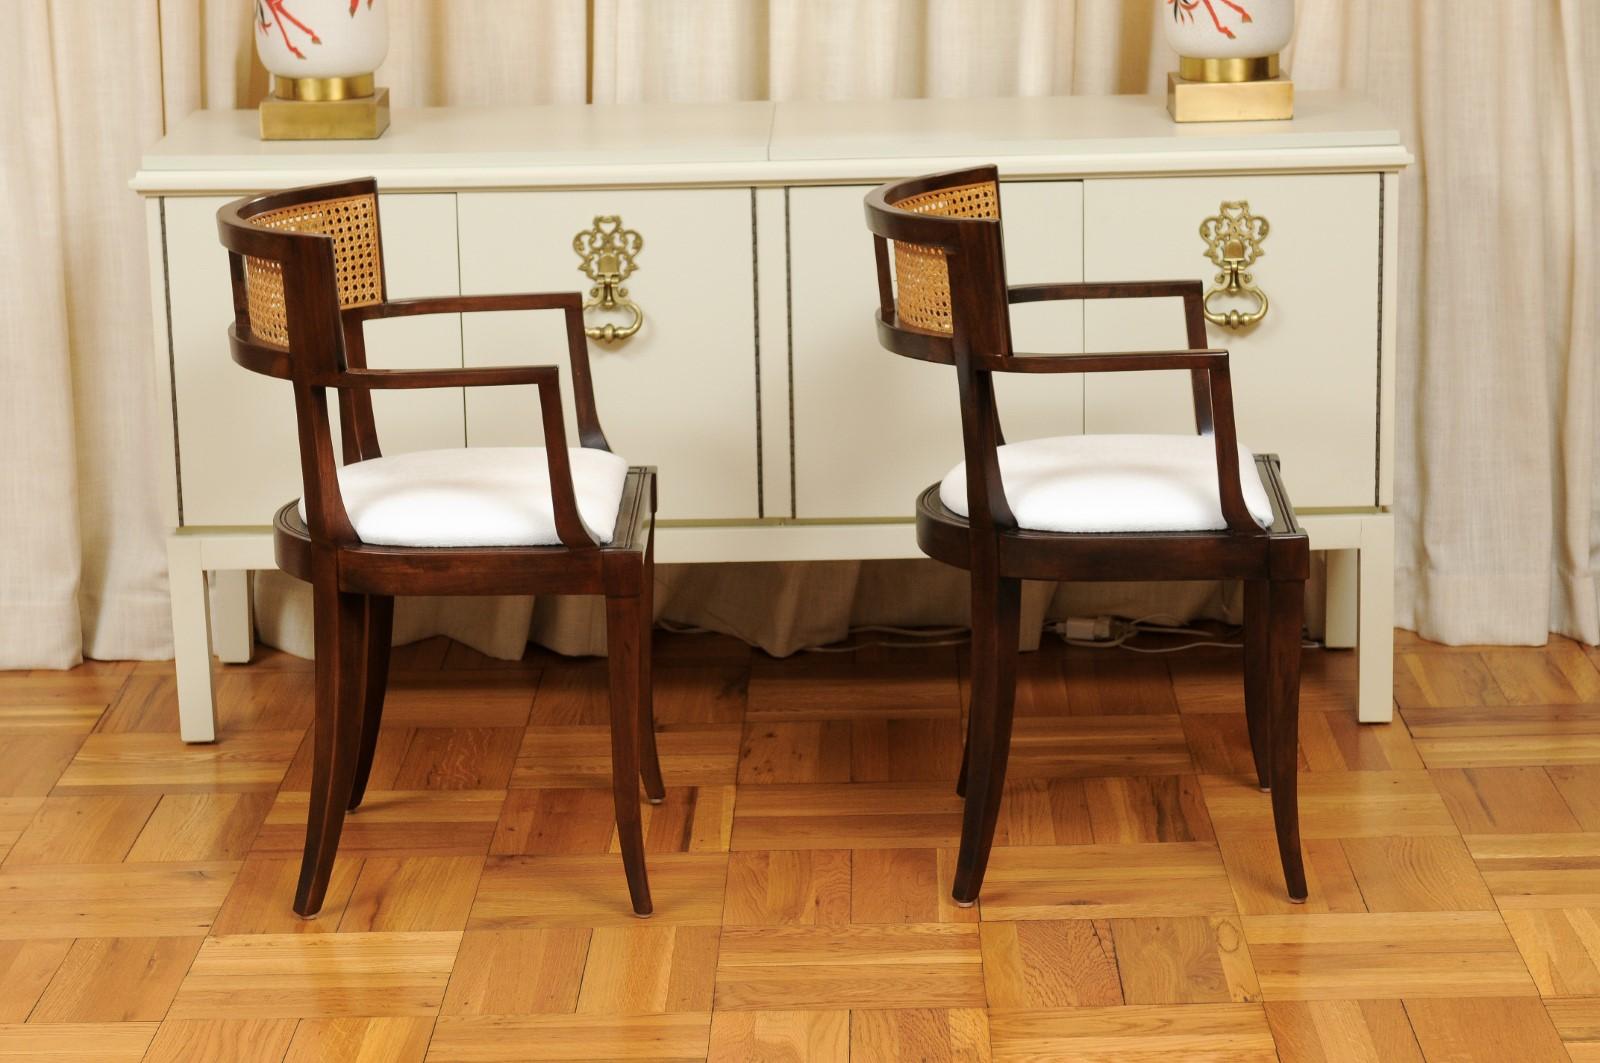 All Arms, Exquisite Set of 20 Klismos Cane Dining Chairs by Baker, circa 1958 For Sale 1